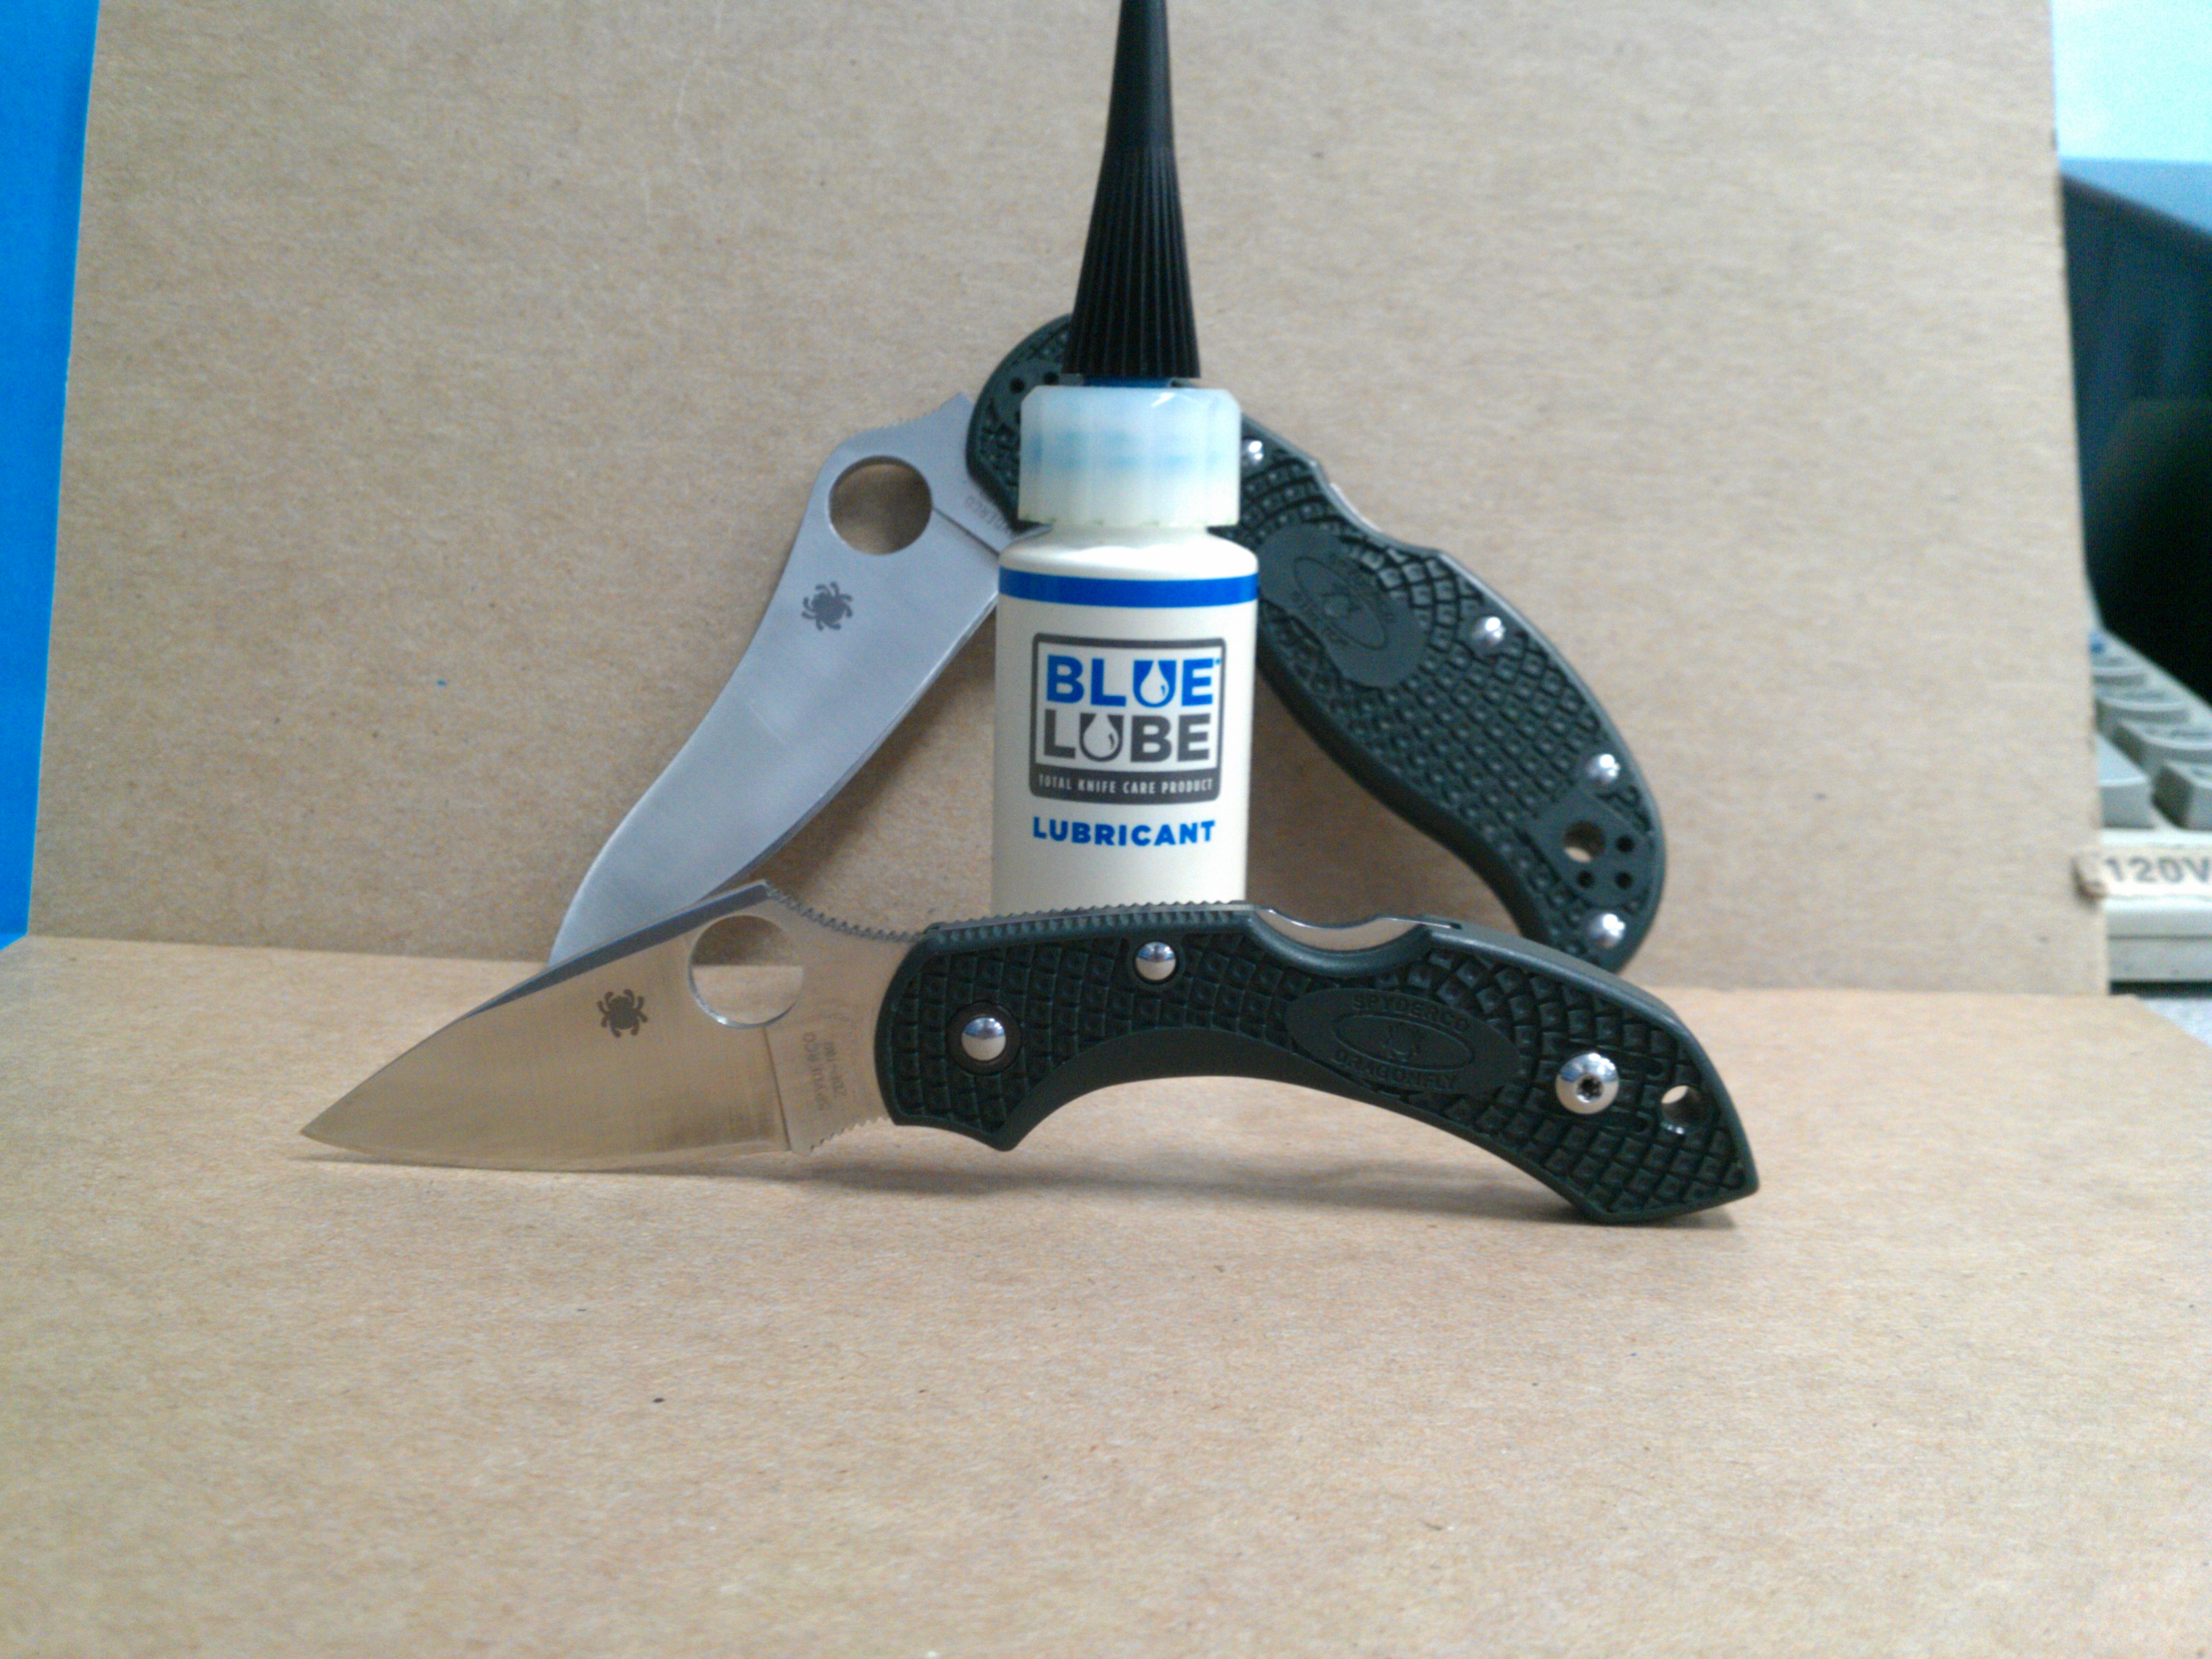 Pocket Knife Maintenance: Cleaning and Lubricating